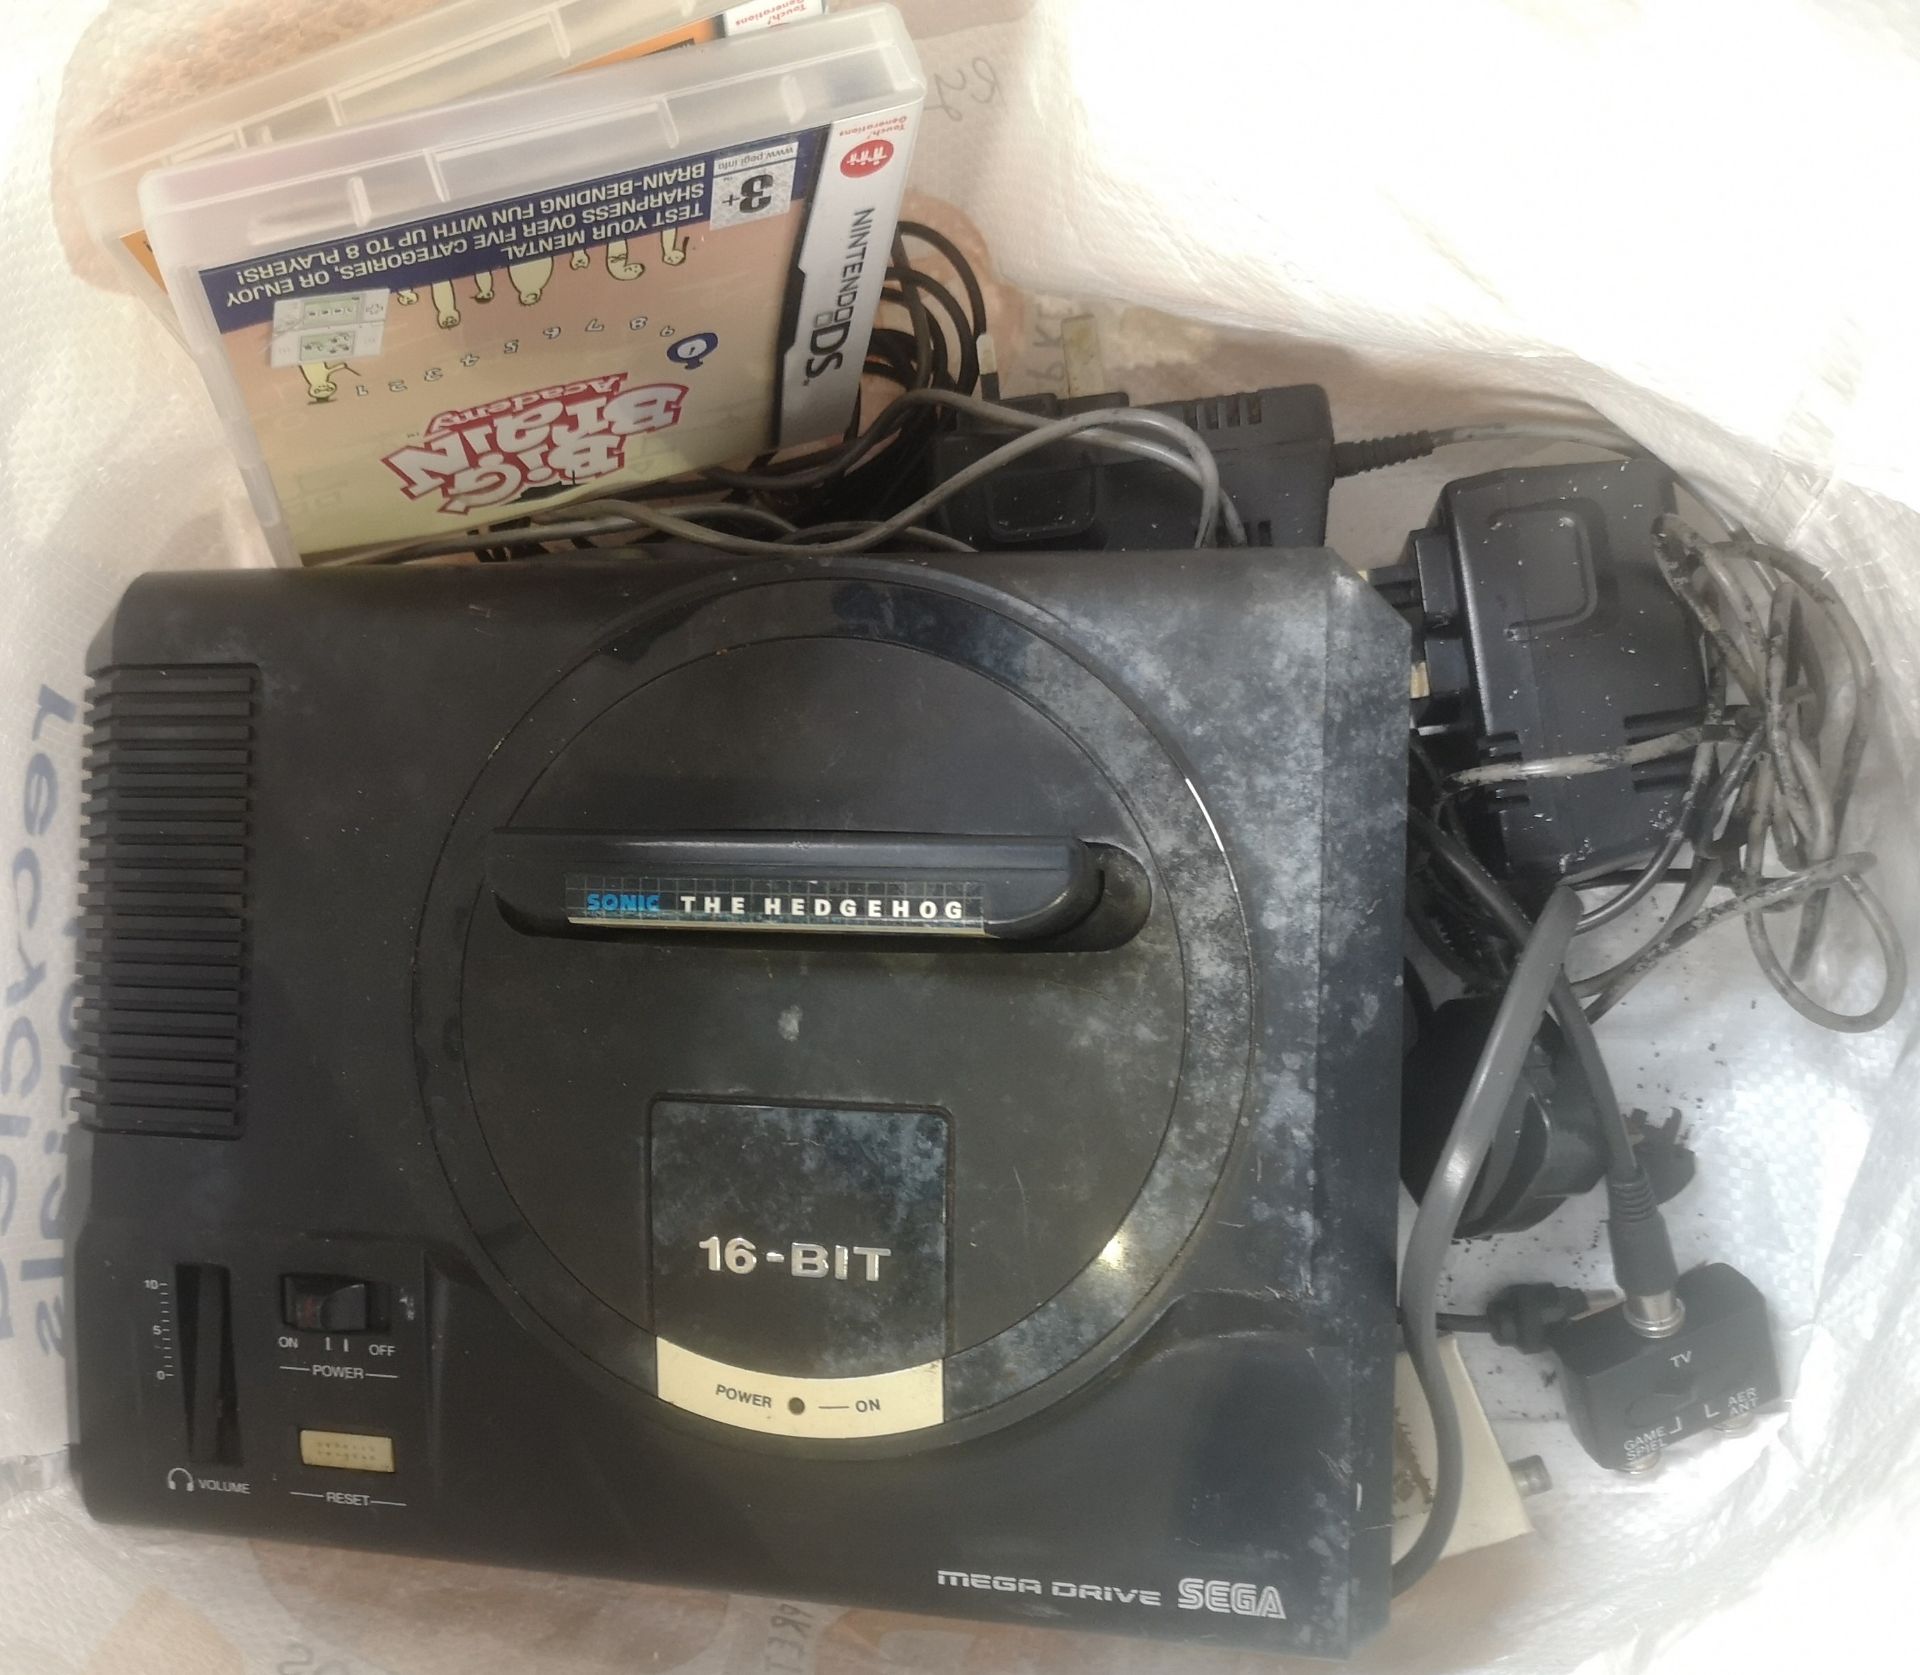 Sega Megadrive together with a Sony Playstation